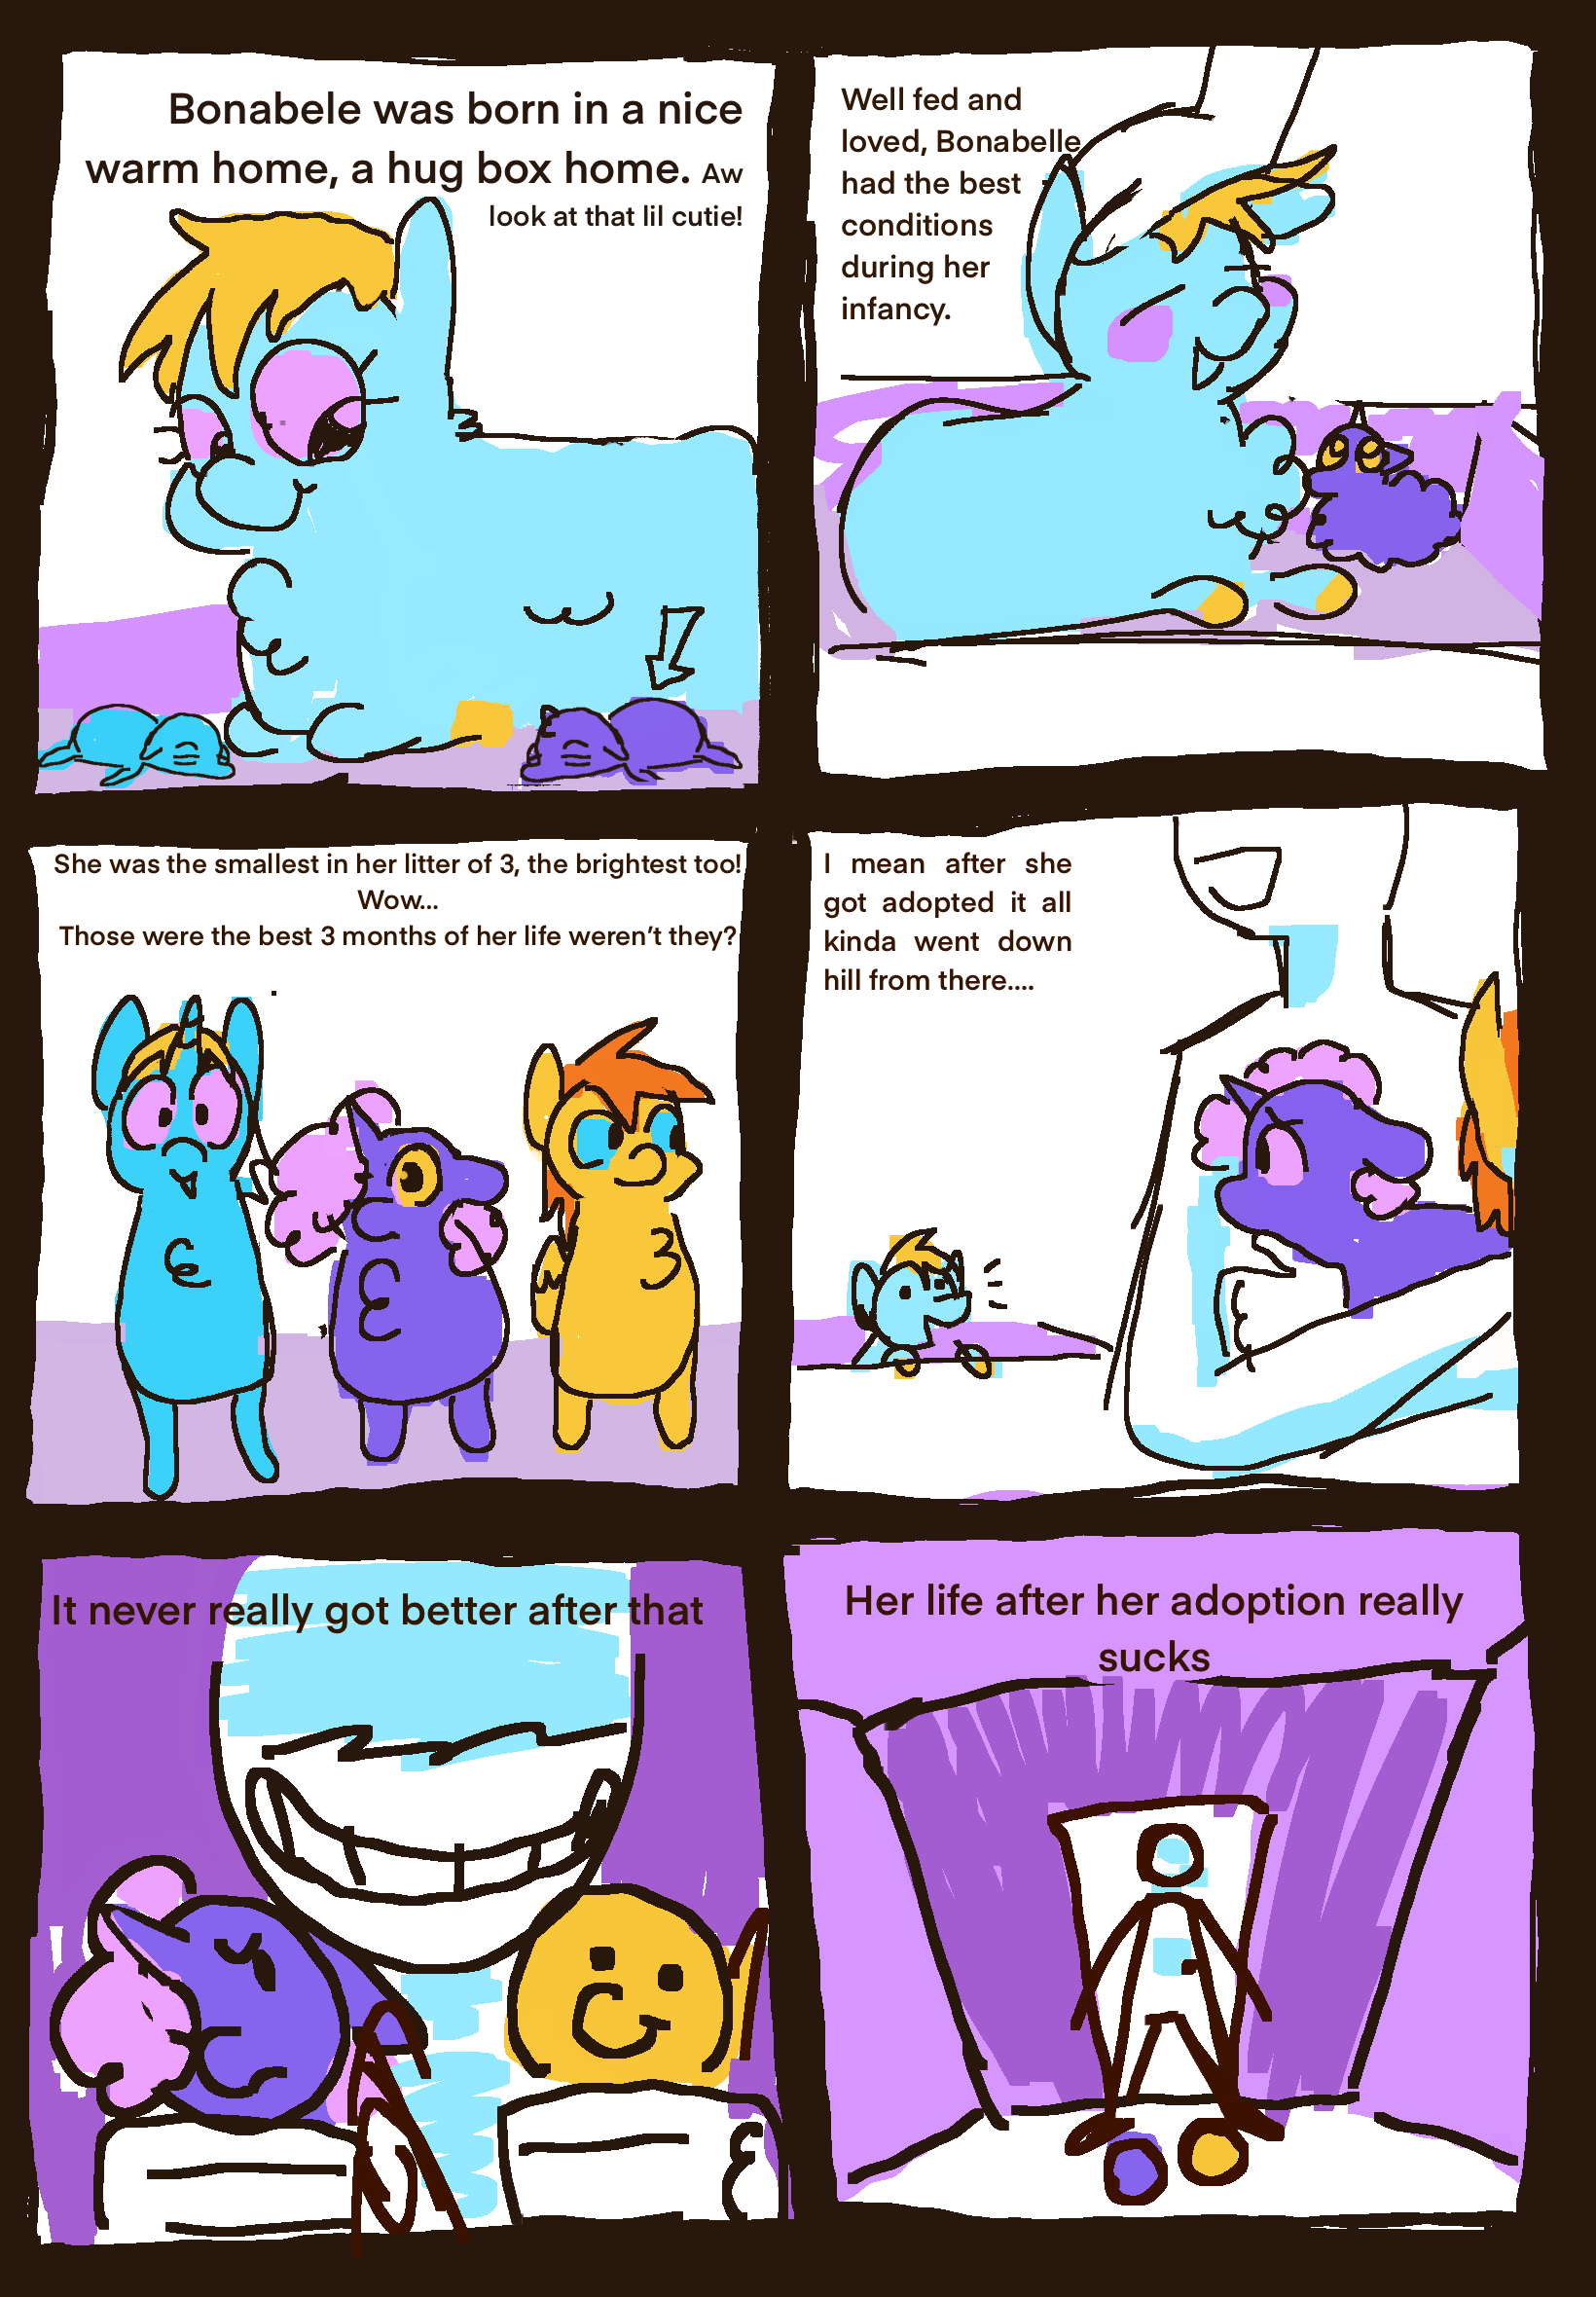 Momma B CHAPTER 1 pages 1-3 [leatherfeather] - Fluffy Image Self ...